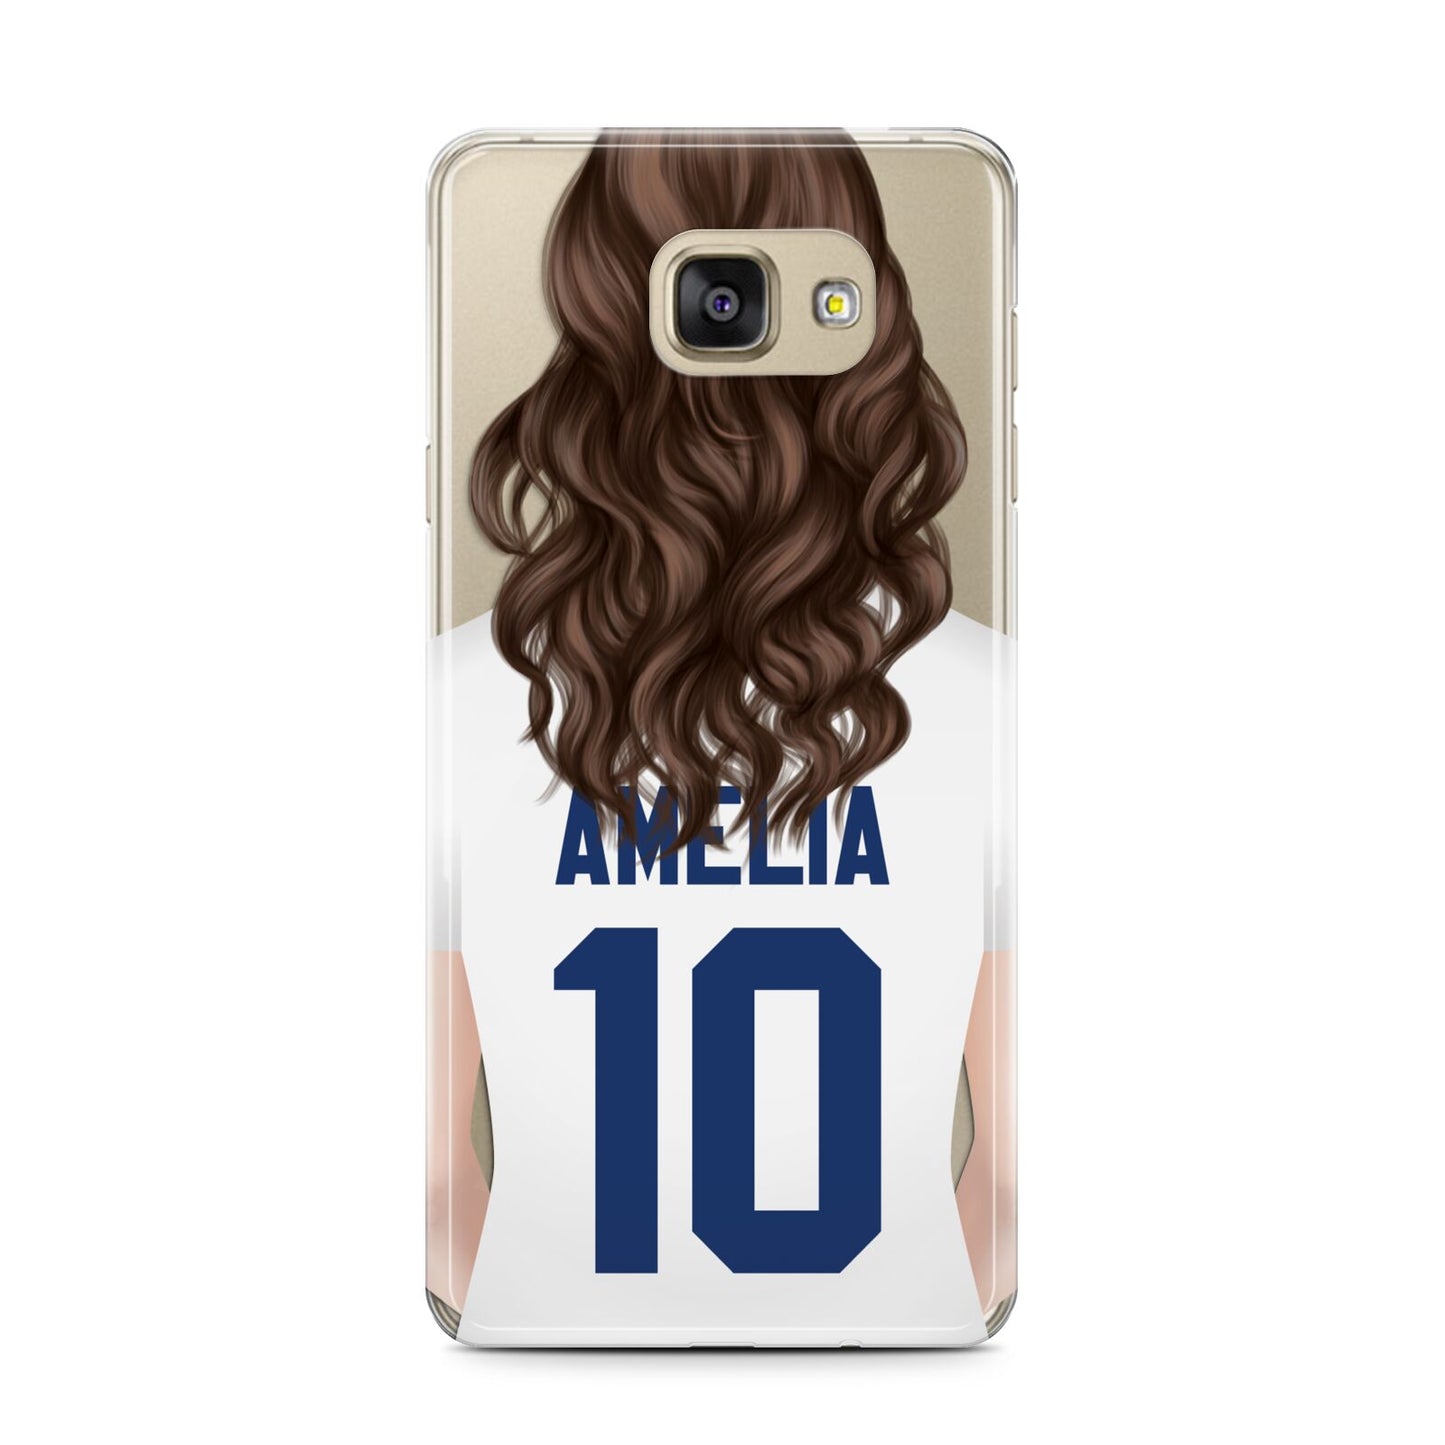 Womens Footballer Personalised Samsung Galaxy A7 2016 Case on gold phone